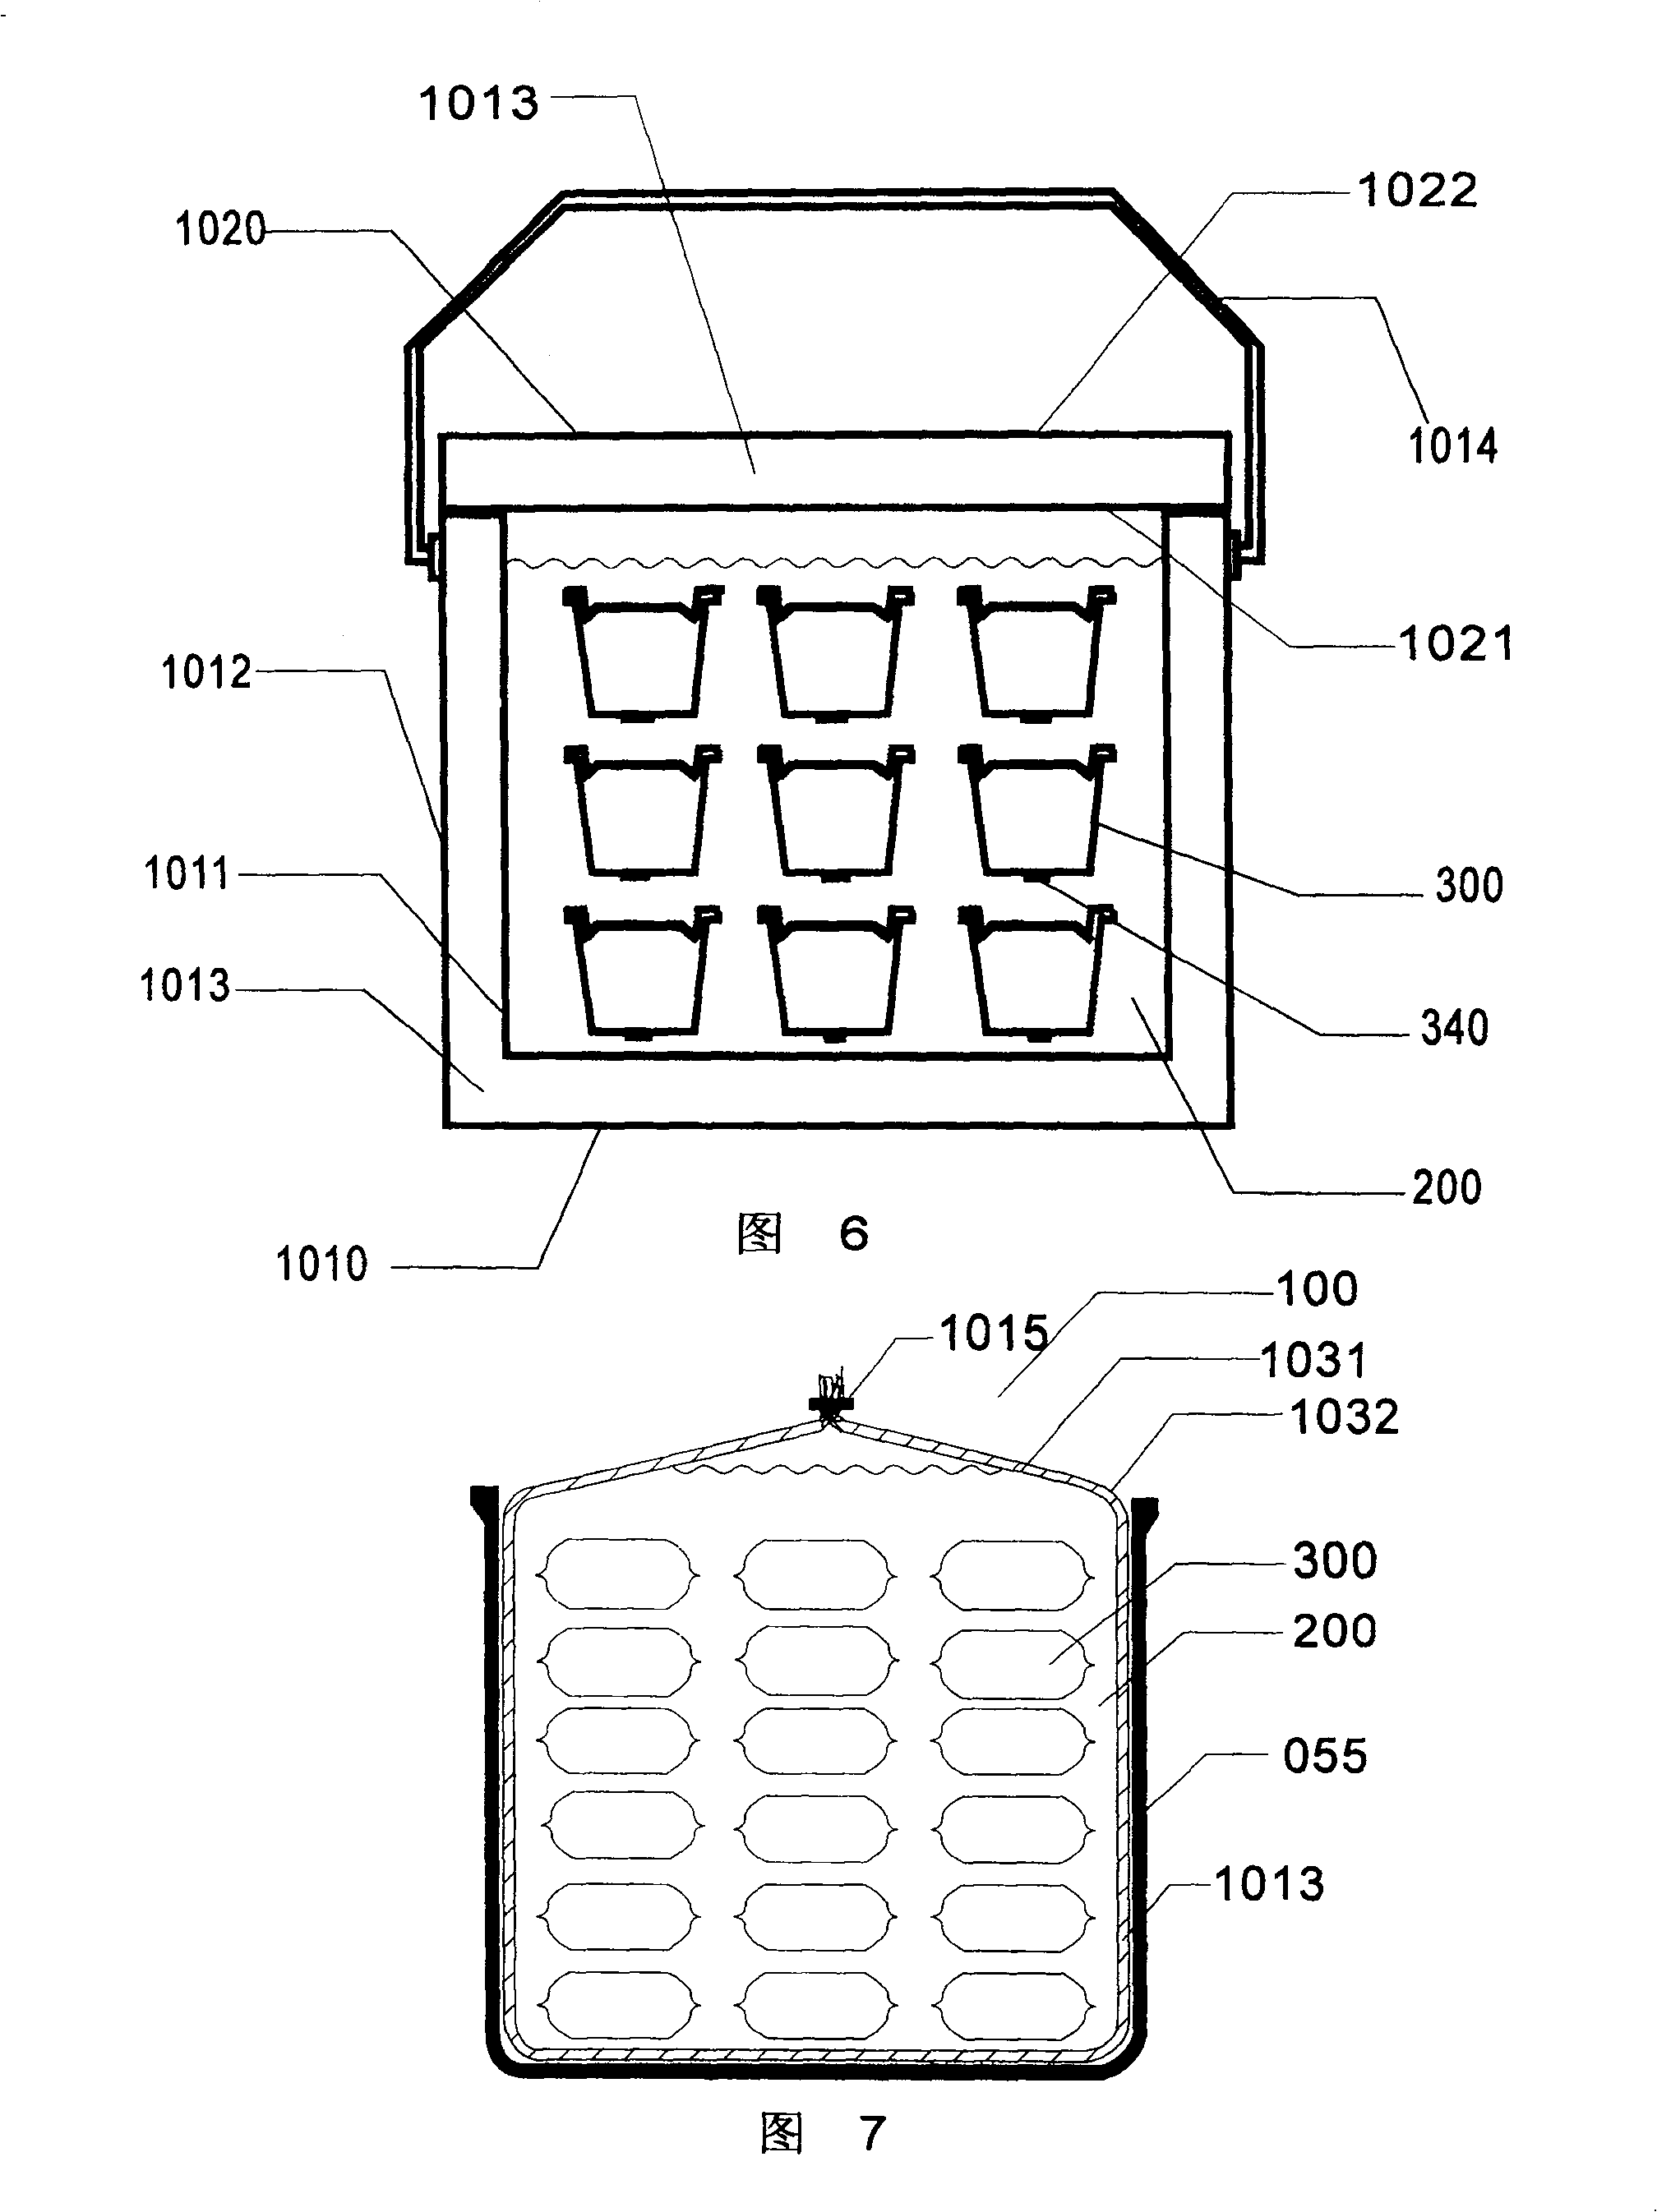 Instant meal producing, storing and transporting process and apparatus